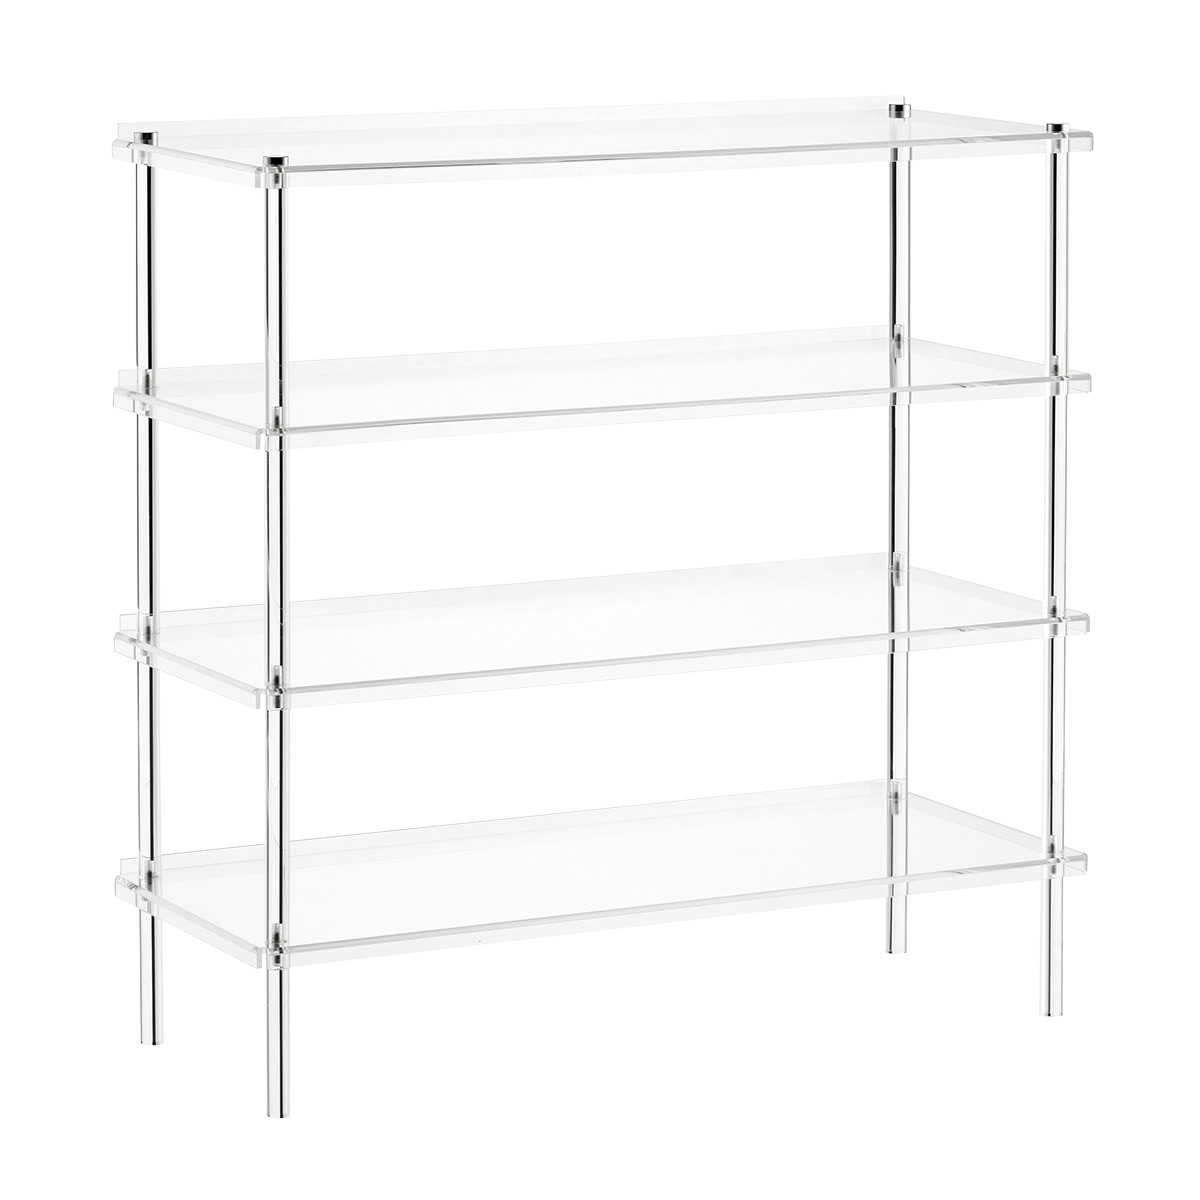 https://www.containerstore.com/catalogimages/480758/10092395-luxe-acrylic-4-tier-shoe-sh.jpg